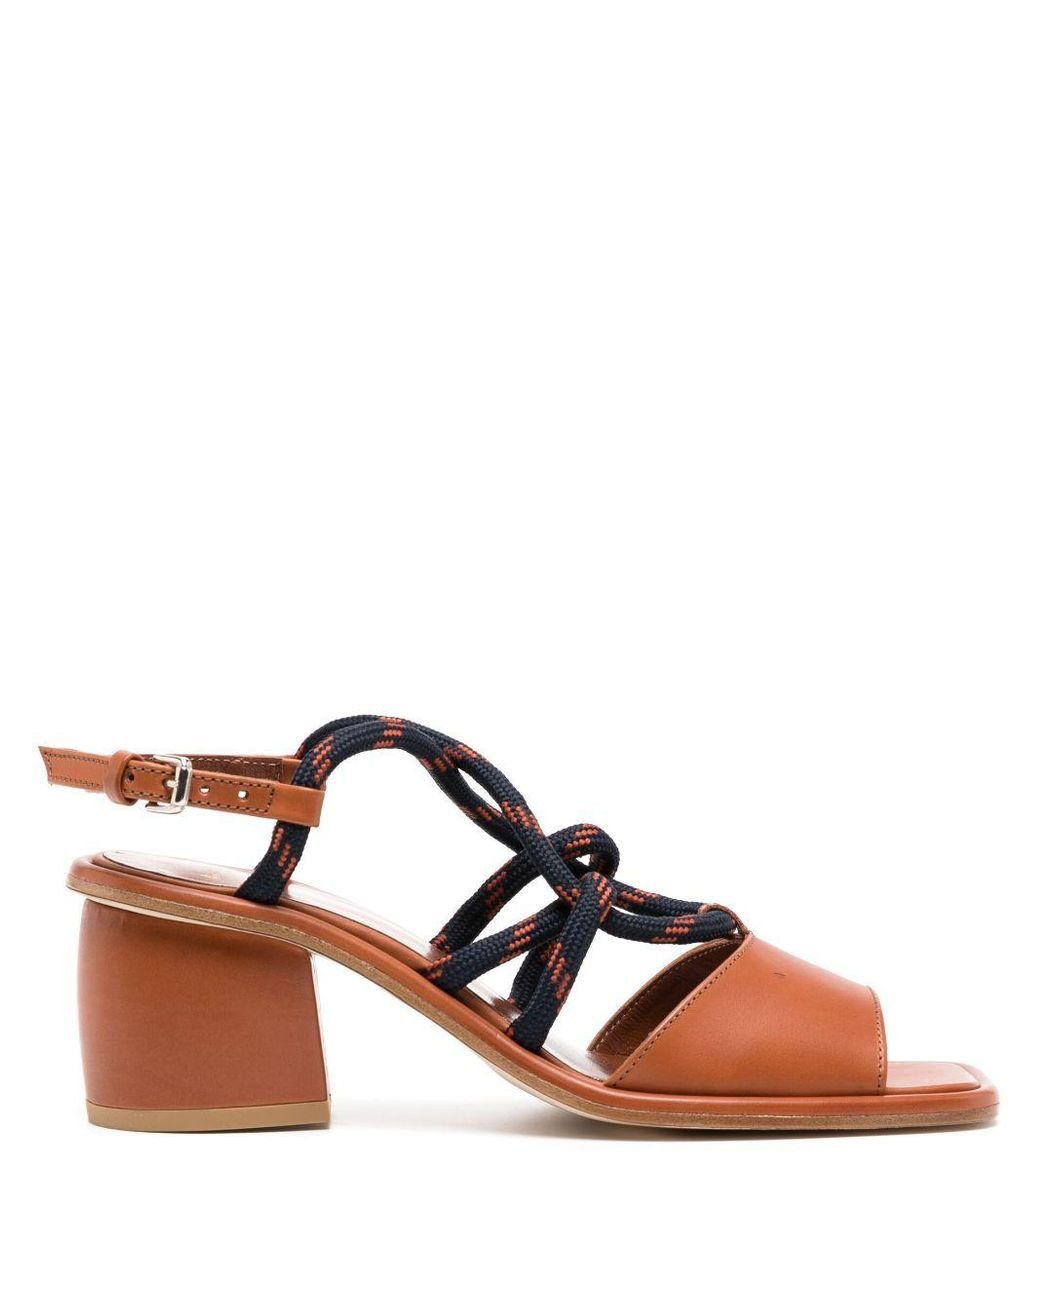 Paul Smith 60mm Leather Sandals in Brown | Lyst